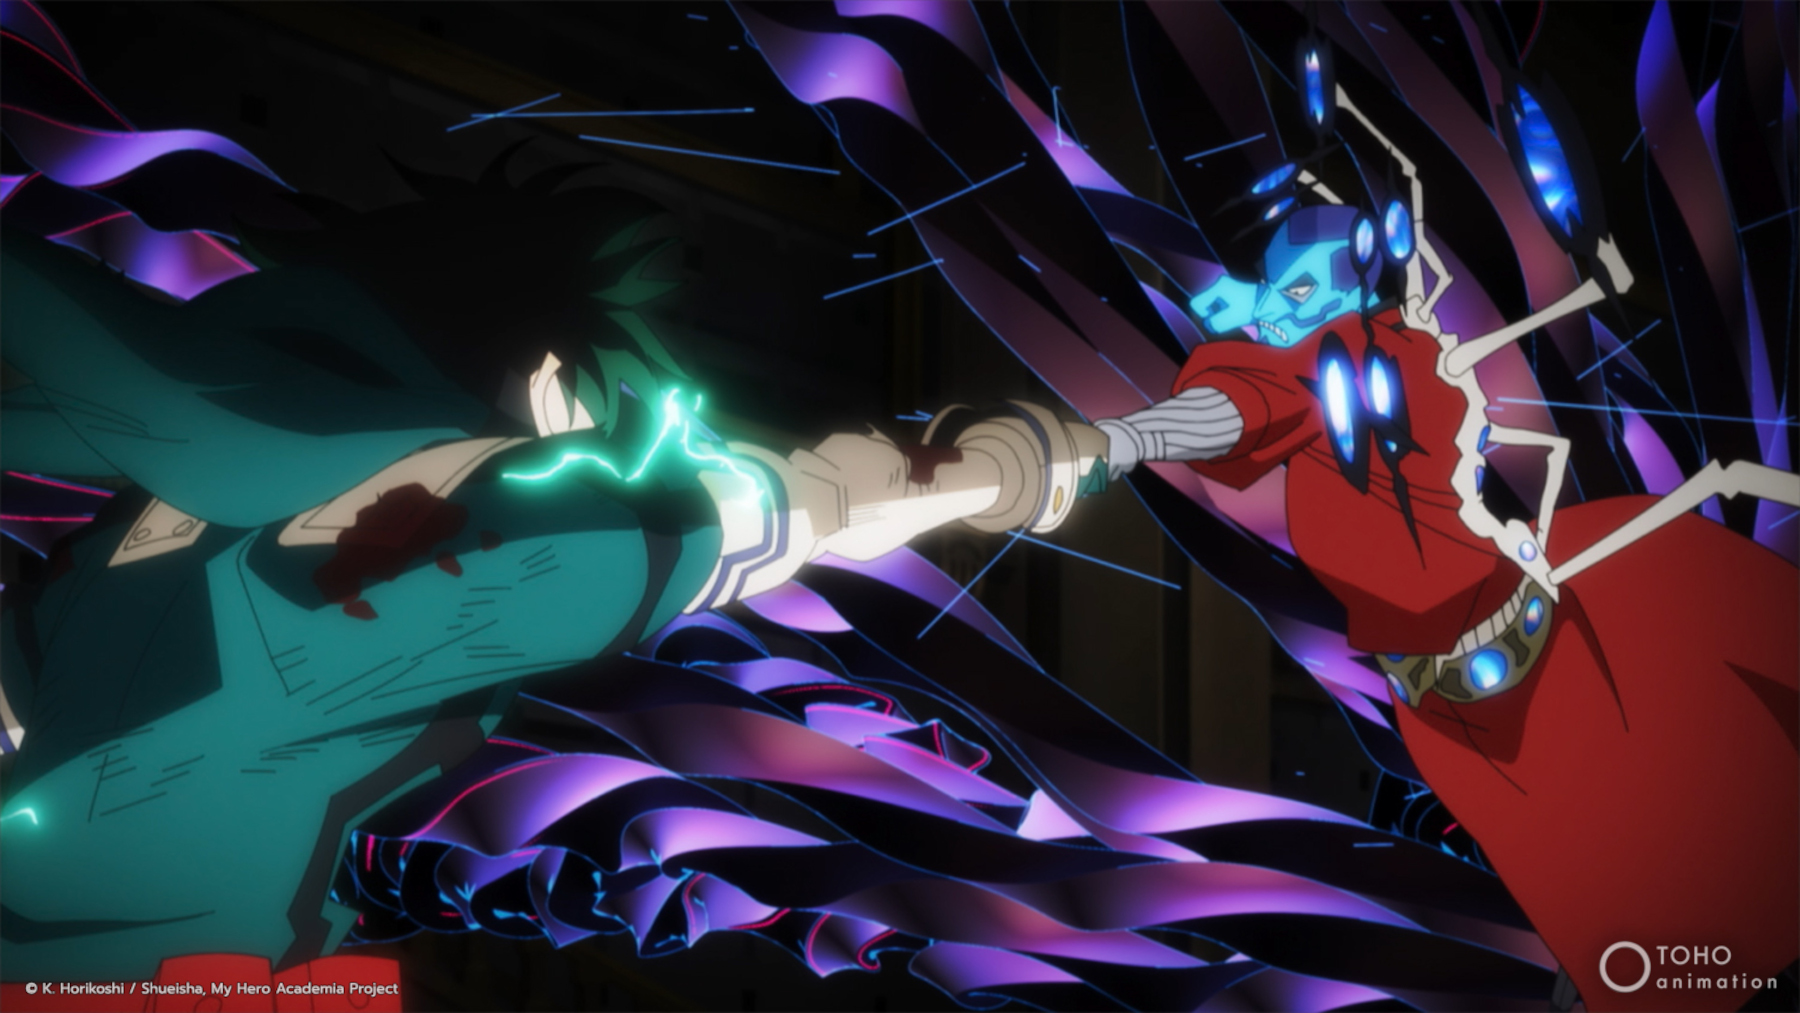 Deku and Flect Turn during the final fight of 'My Hero Academia: World Heroes' Mission,' which received a DVD and Blu-ray release date. Their fists are connecting, and the background looks like purple mirror fragments.